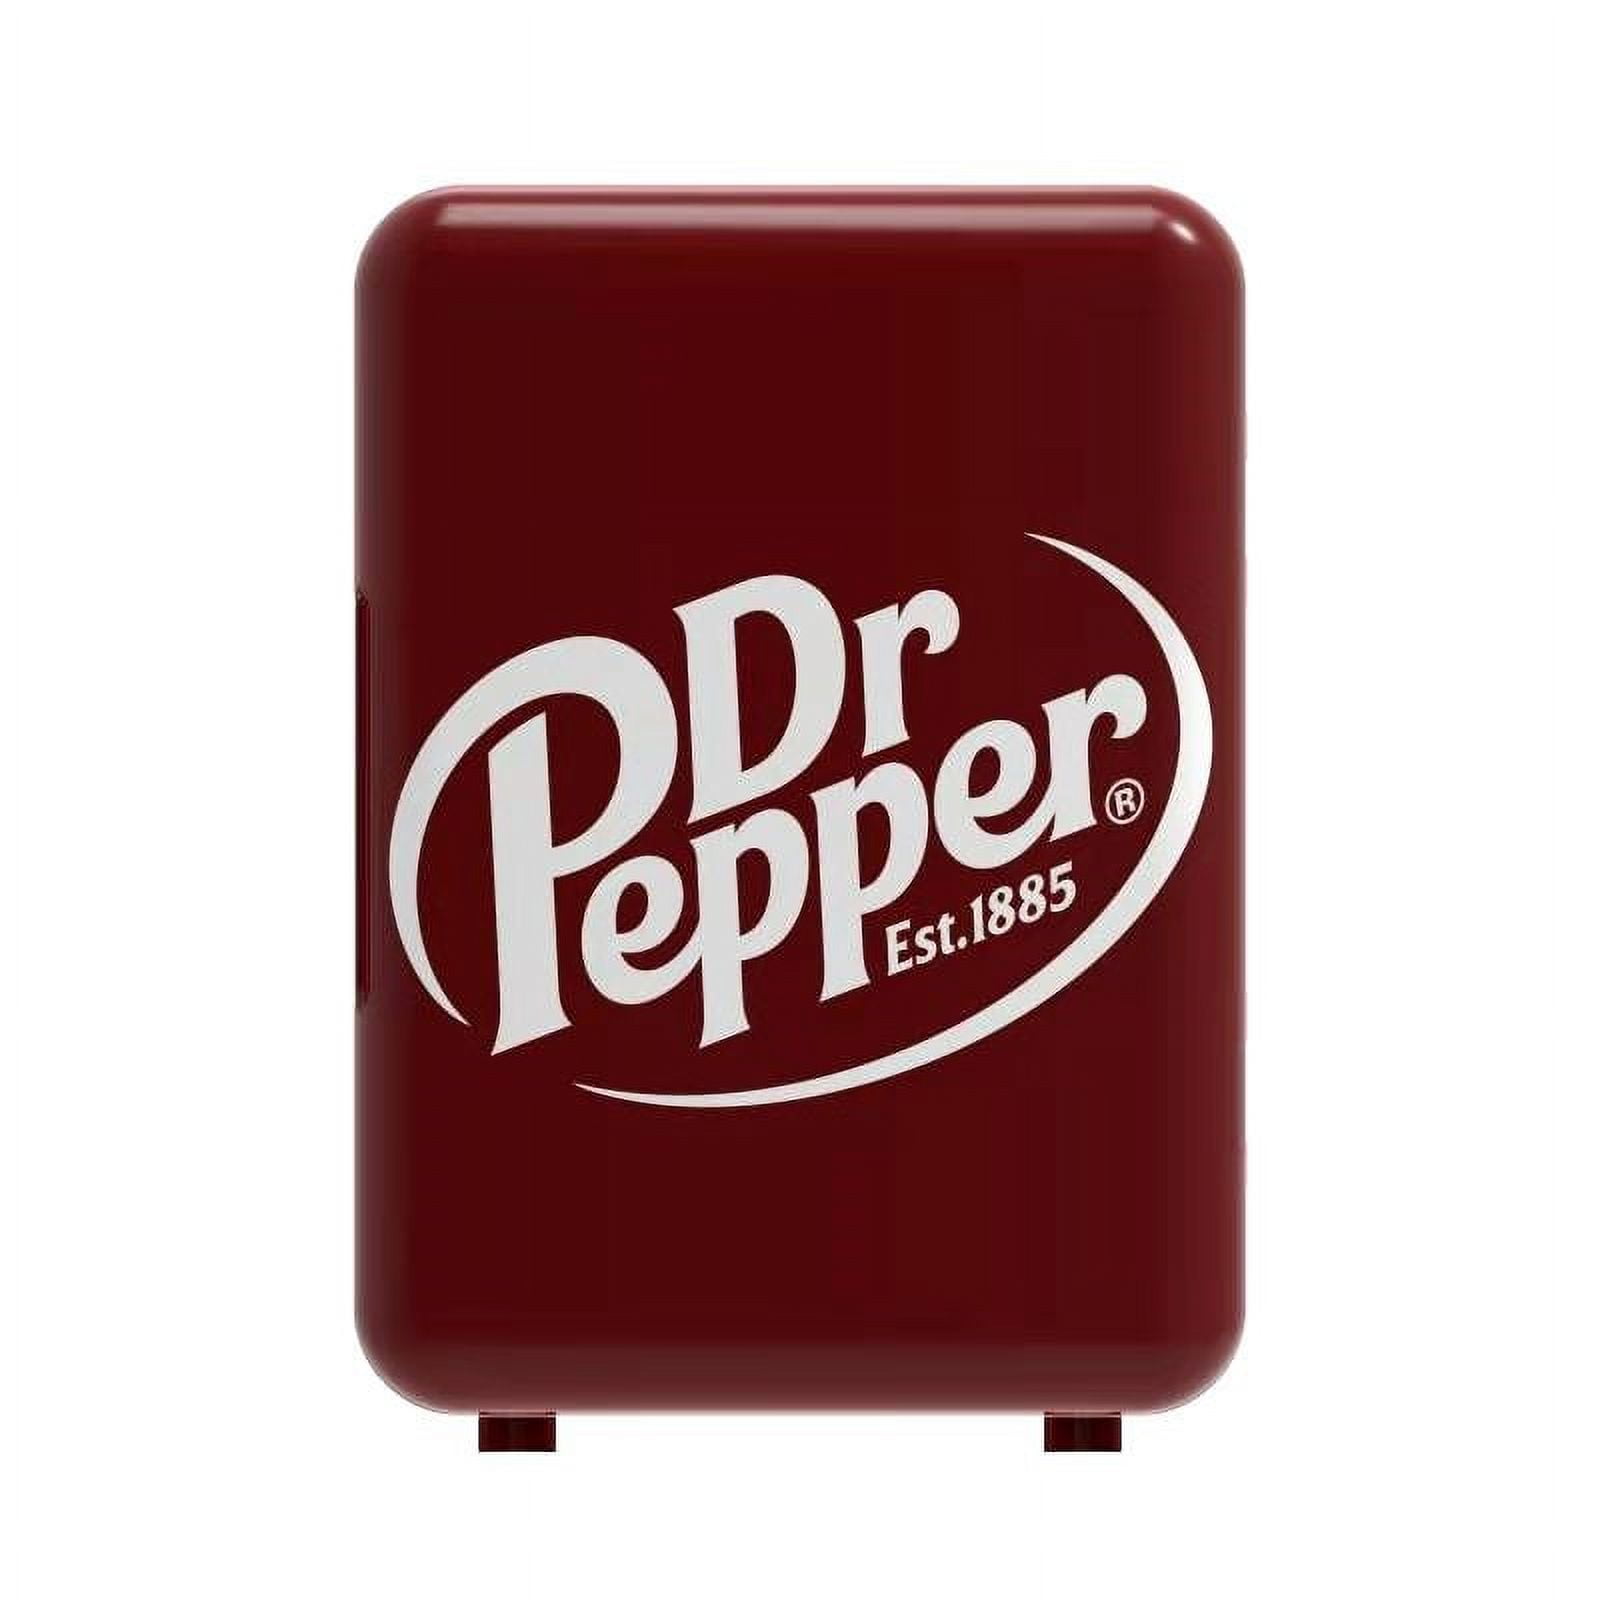 Got my can cooler today! : r/DrPepper